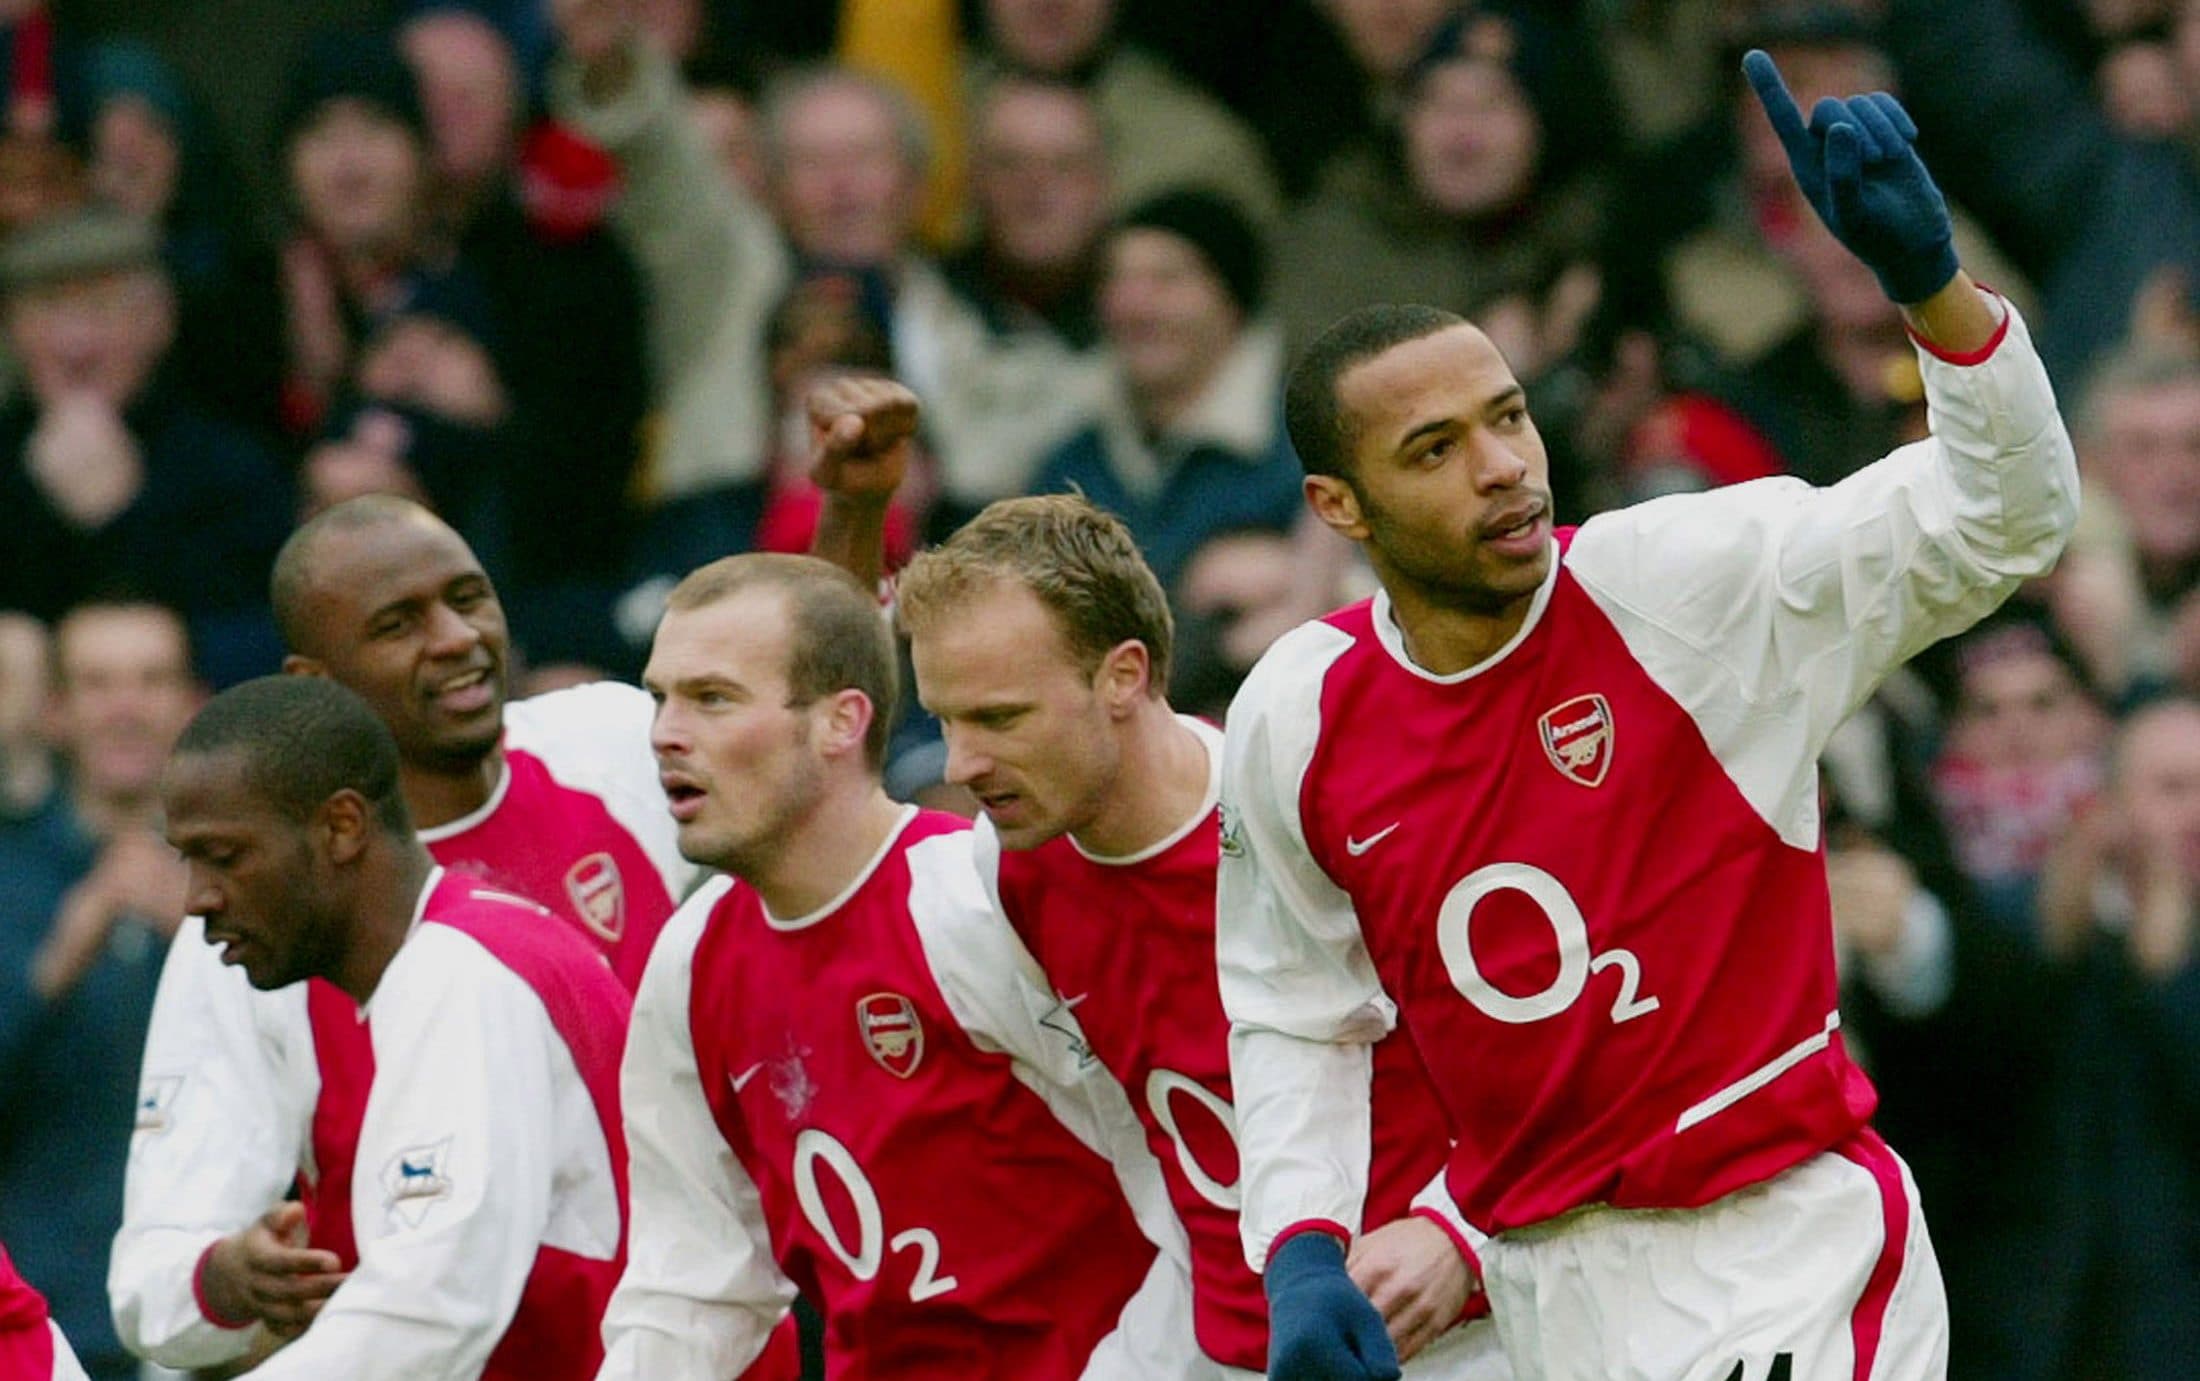 arsenal’s team this season will be better than invincibles – if they win title